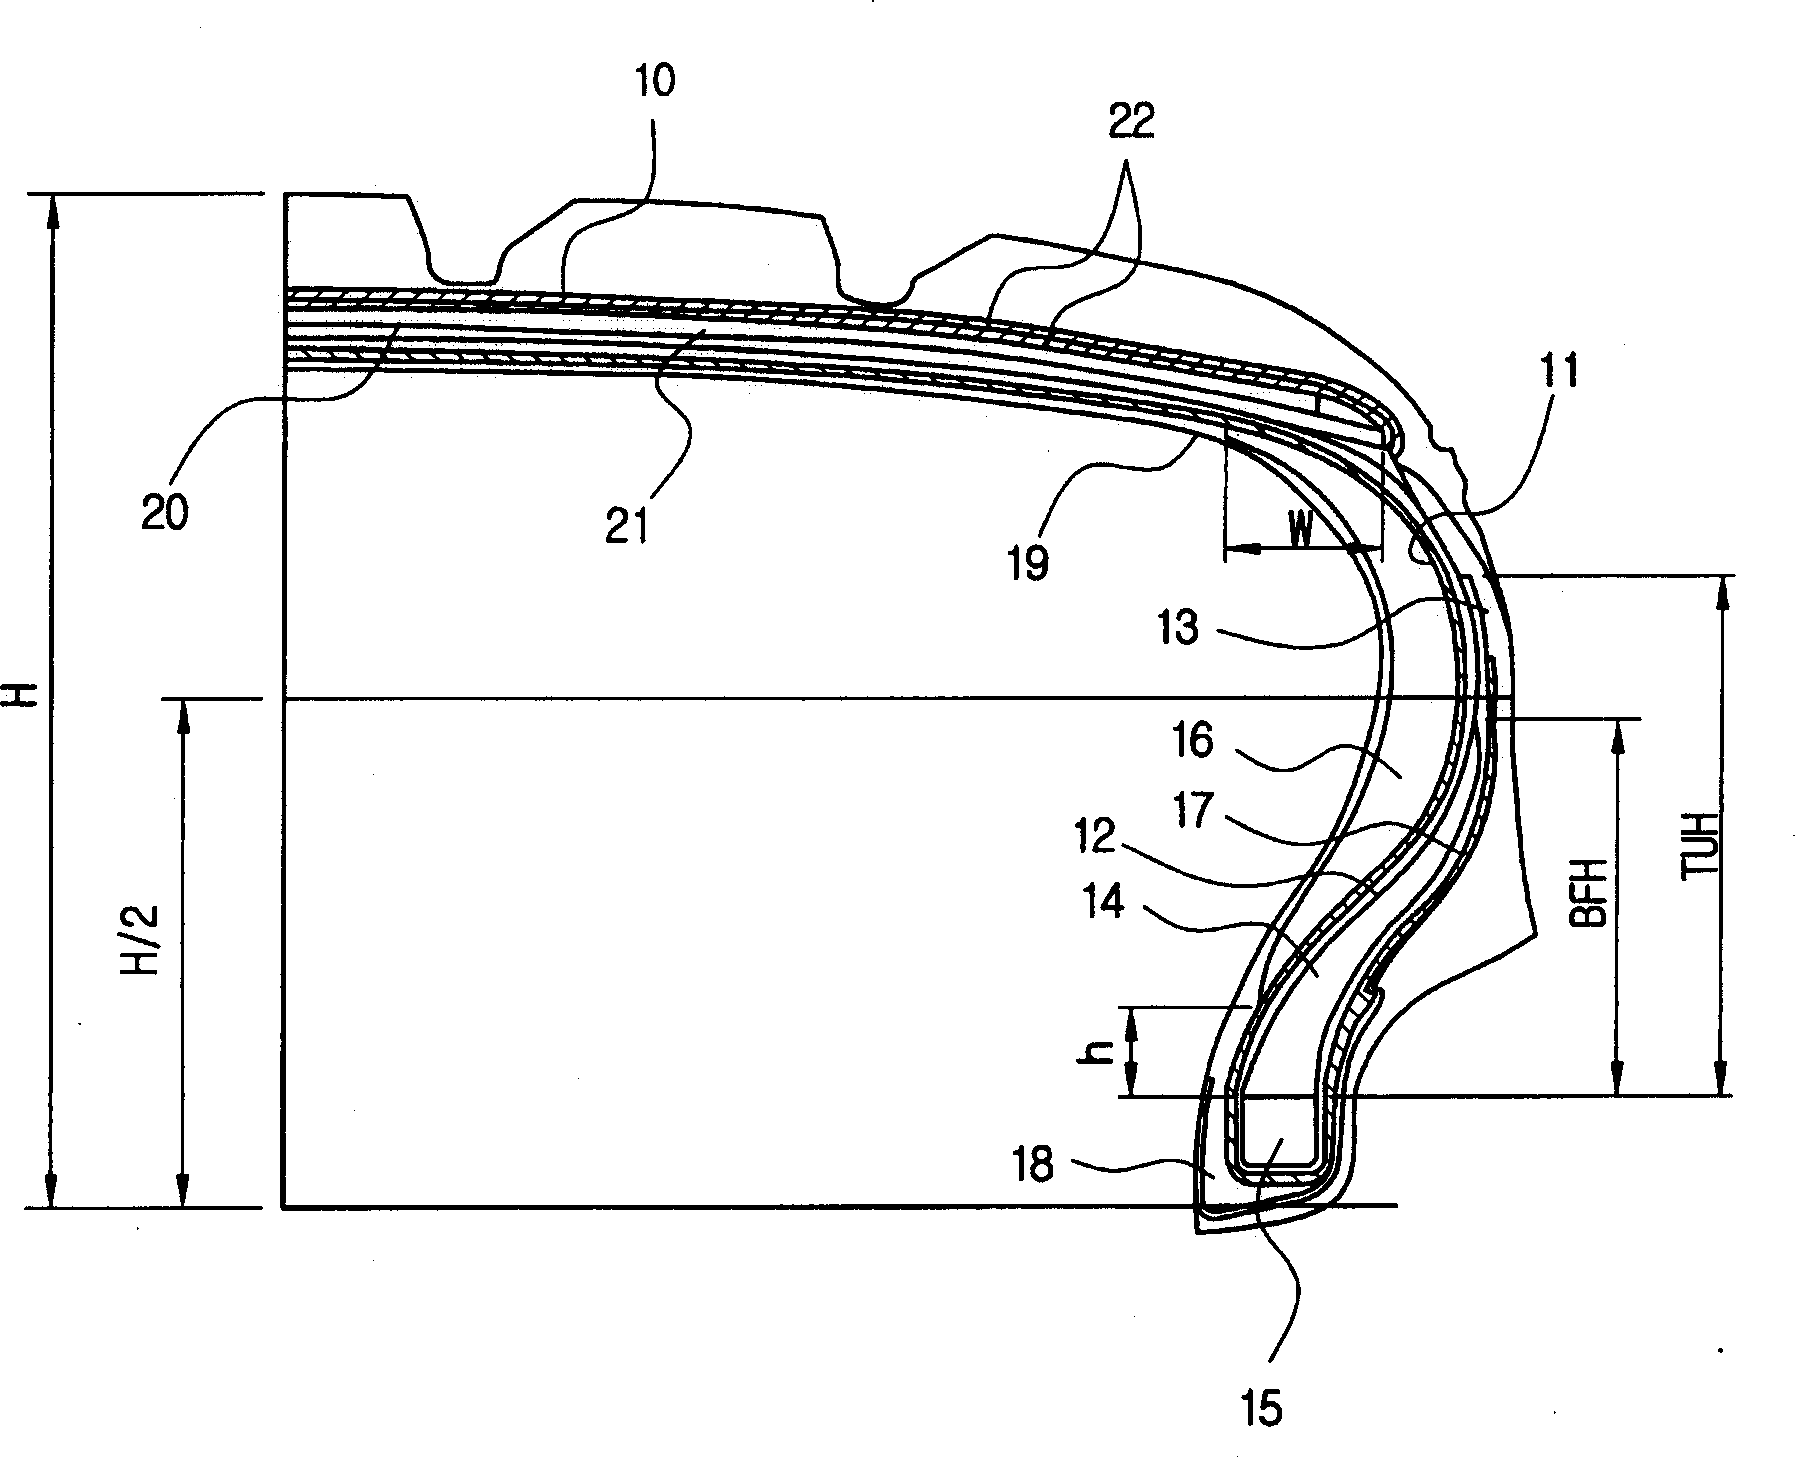 Self-supporting type pneumatic run-flat tire, and insert and bead rubber composition for run-flat capability